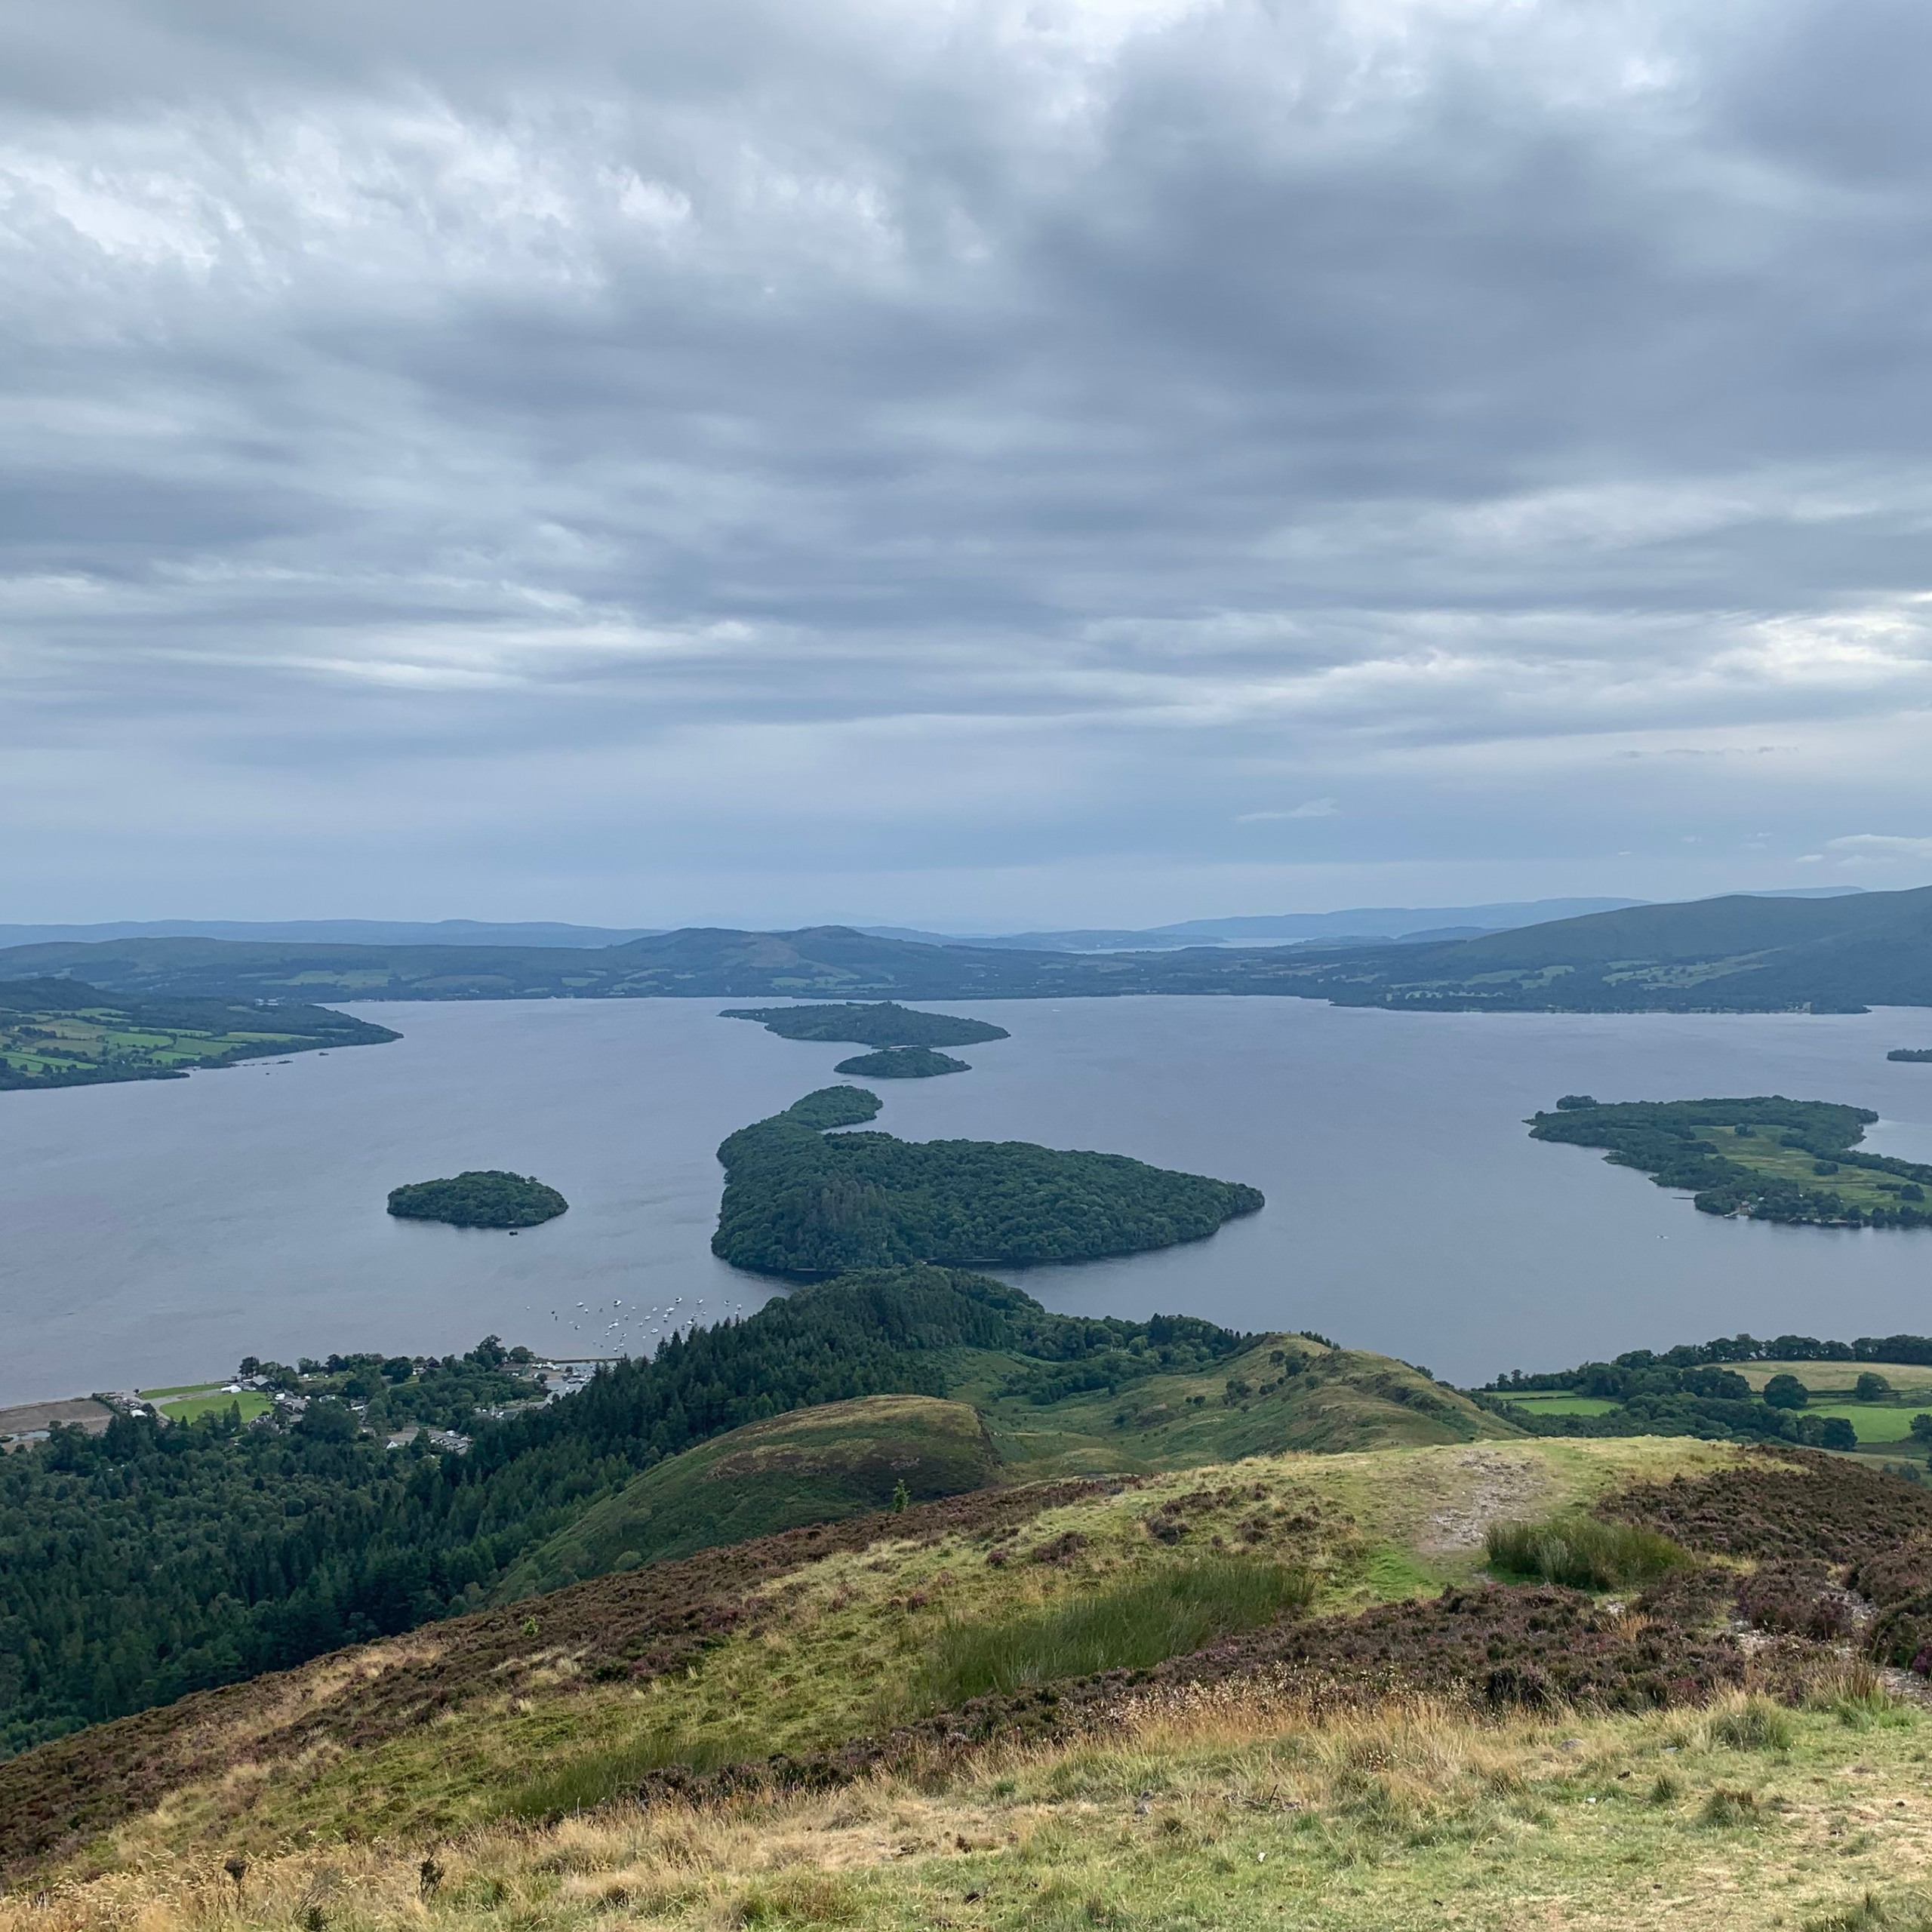 View over Loch Lomond from Conic Hill